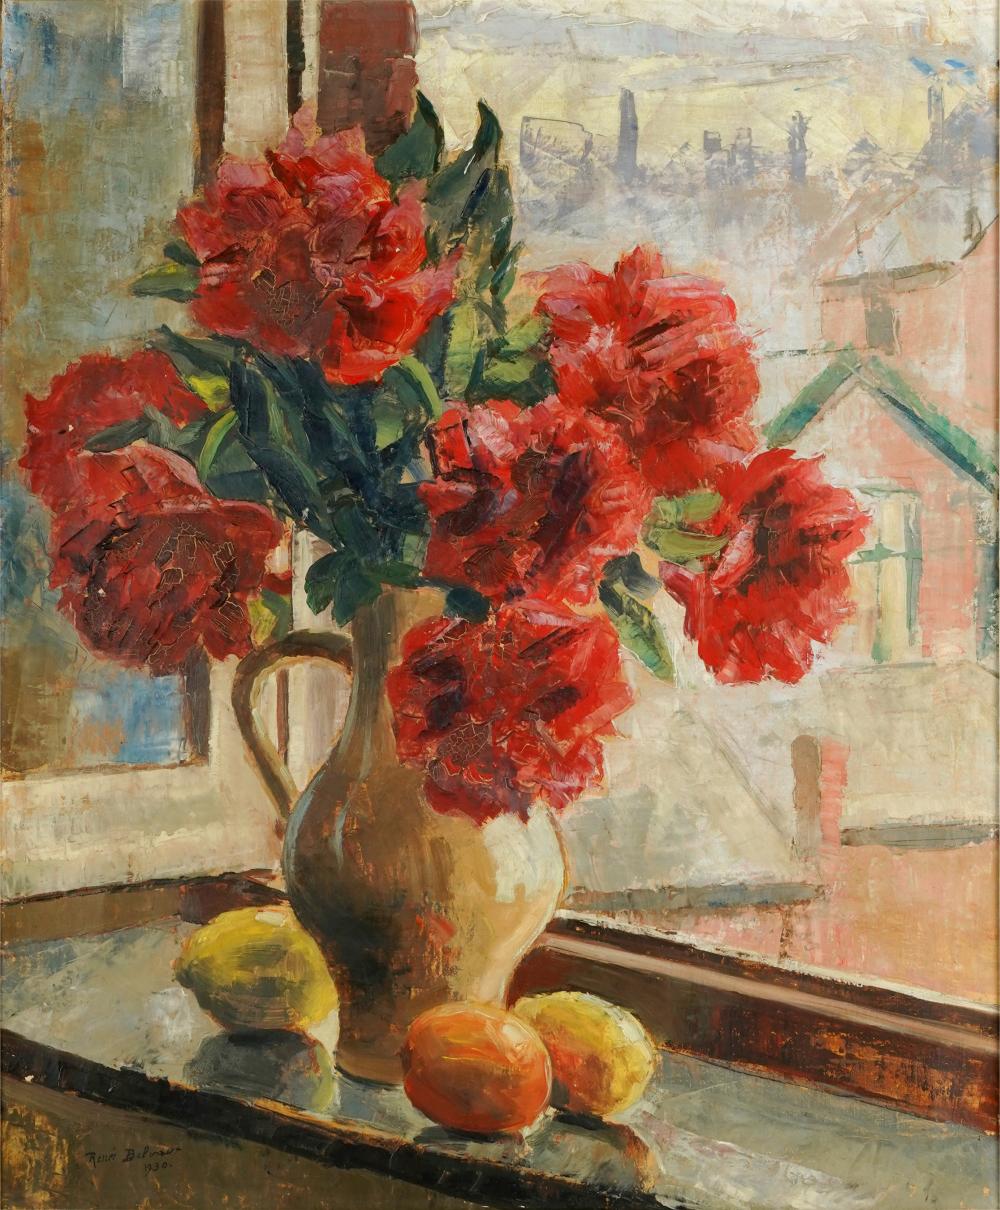 20TH CENTURY: STILL LIFE WITH FLOWERS